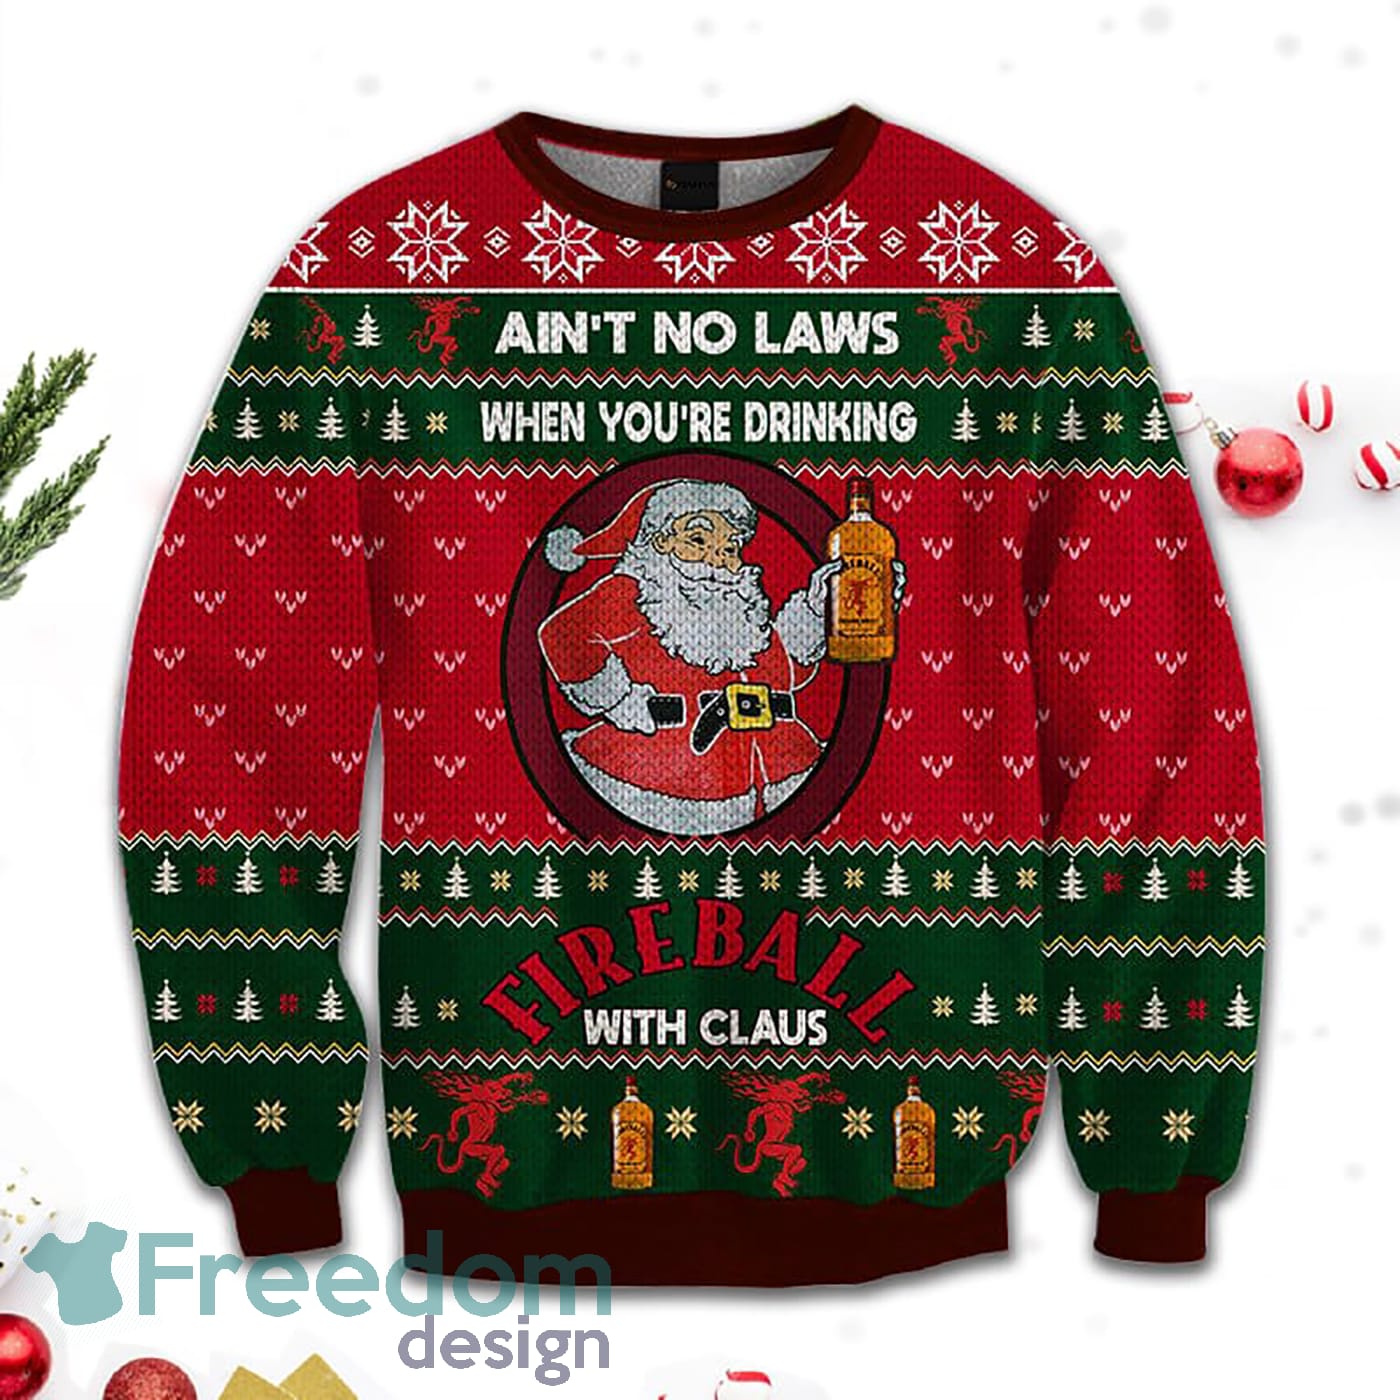 Merr Christmas Ain't No Laws When You Drink Fireball Cinnamon Whisky With Claus Sweatshirt